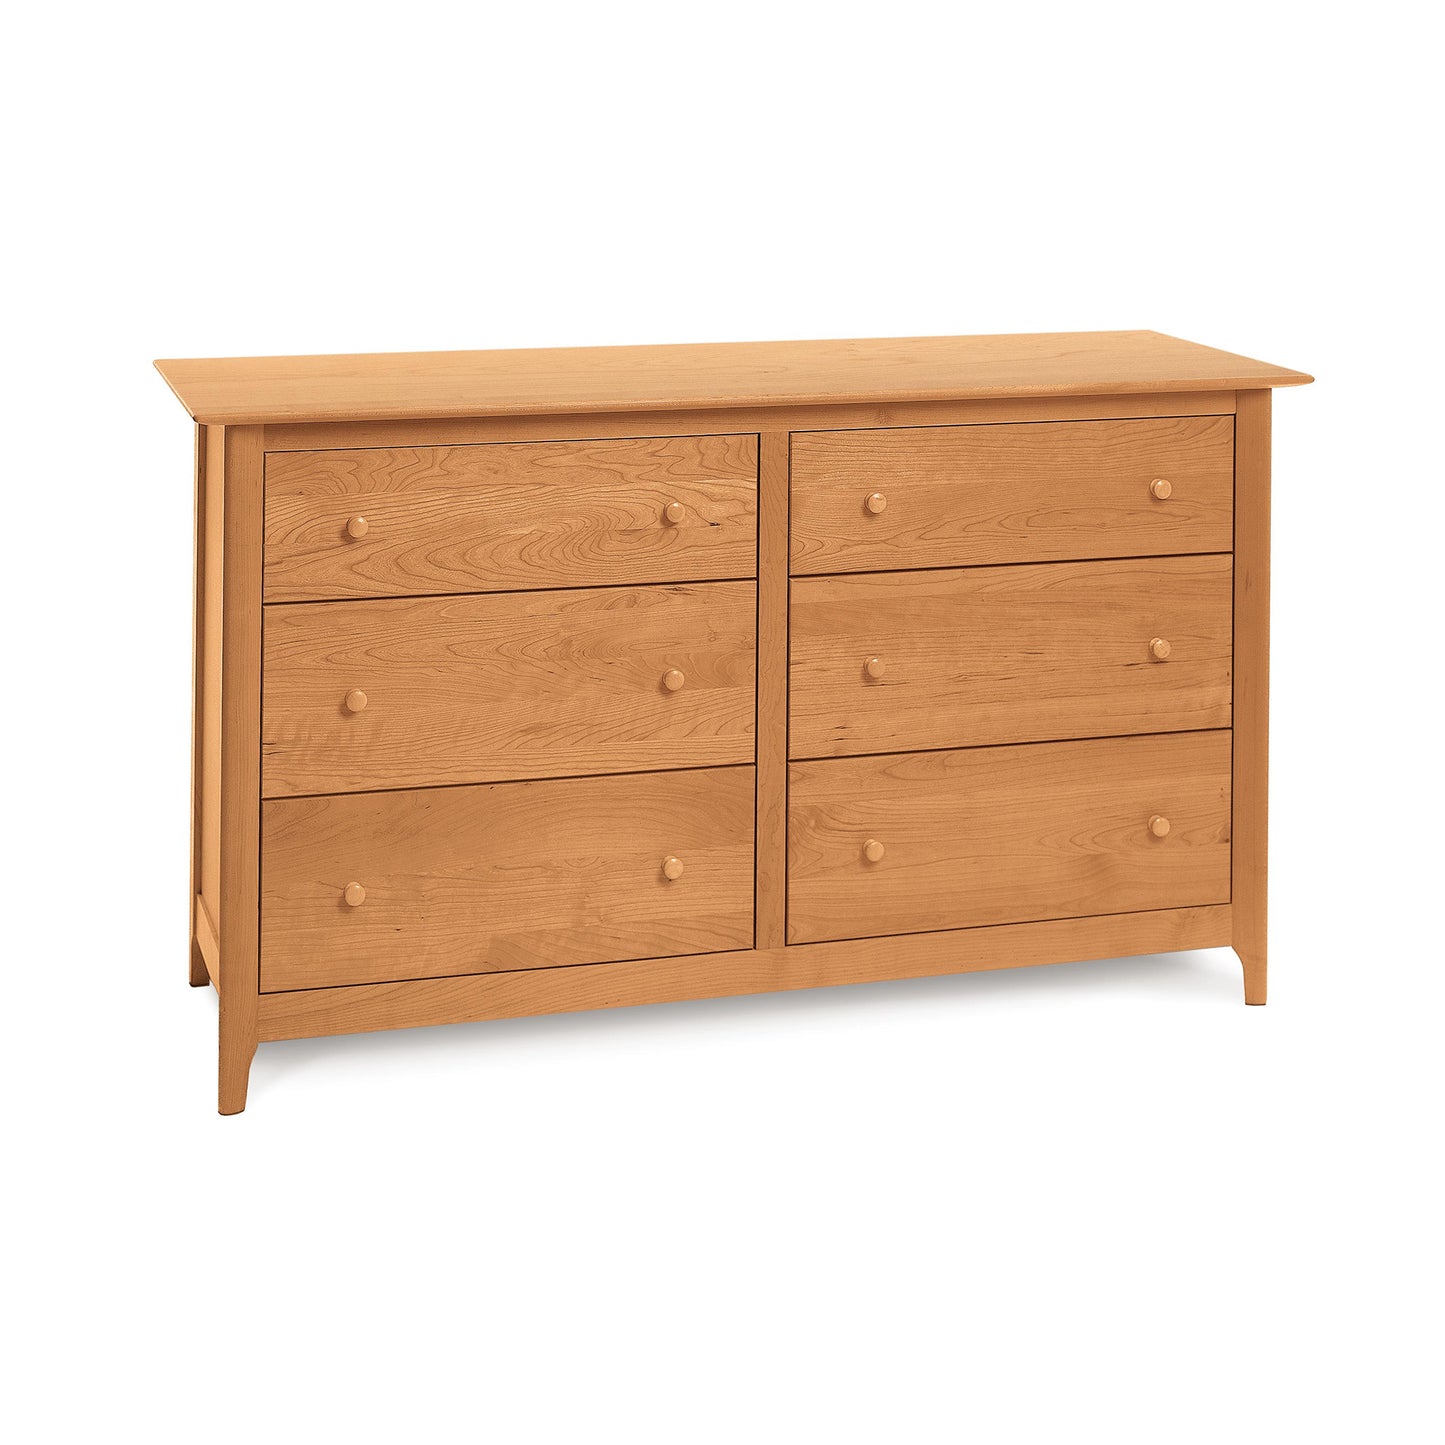 A luxurious Copeland Furniture wooden Sarah 6-Drawer Dresser with drawers on a white background, featuring American Shaker design.